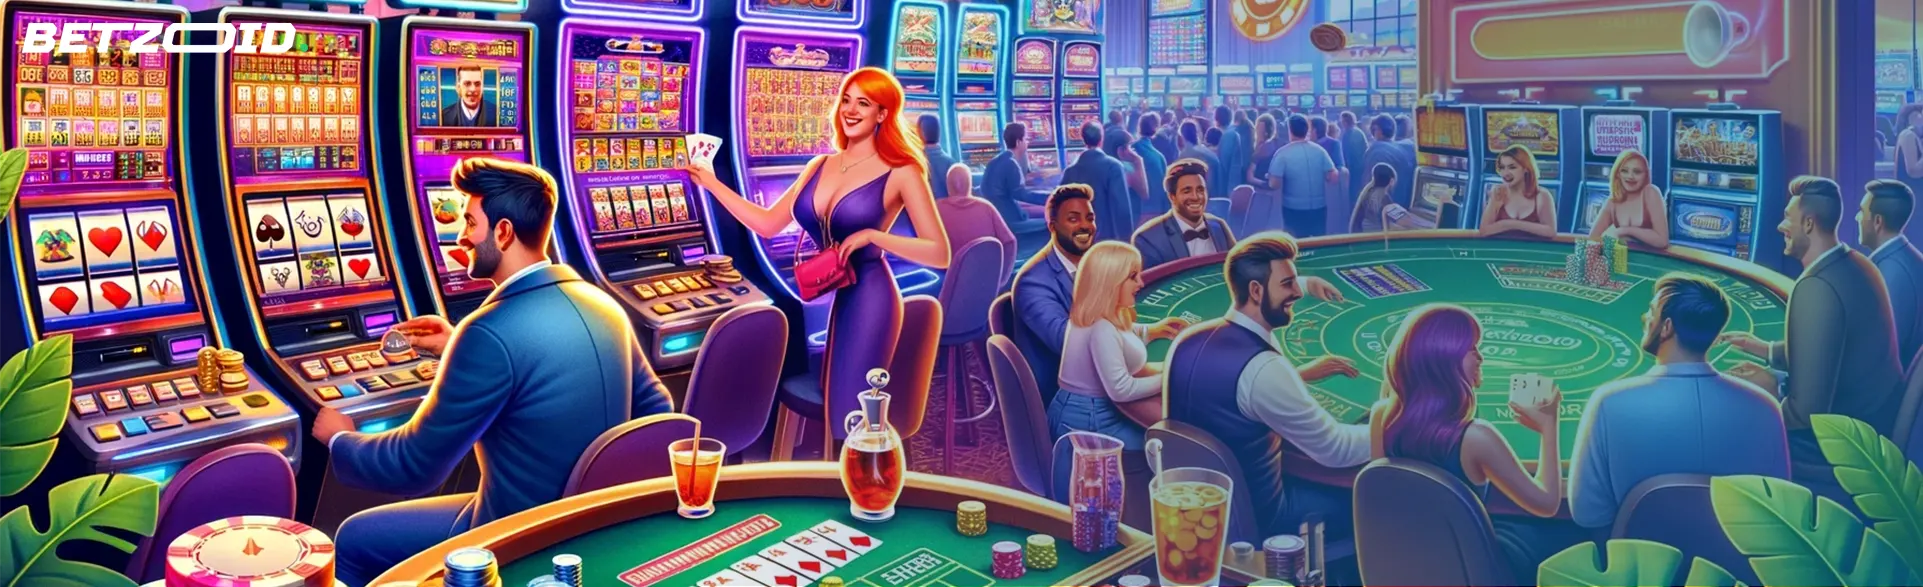 People playing slot machines and table games with ₹300 minimum deposit in a lively casino atmosphere.